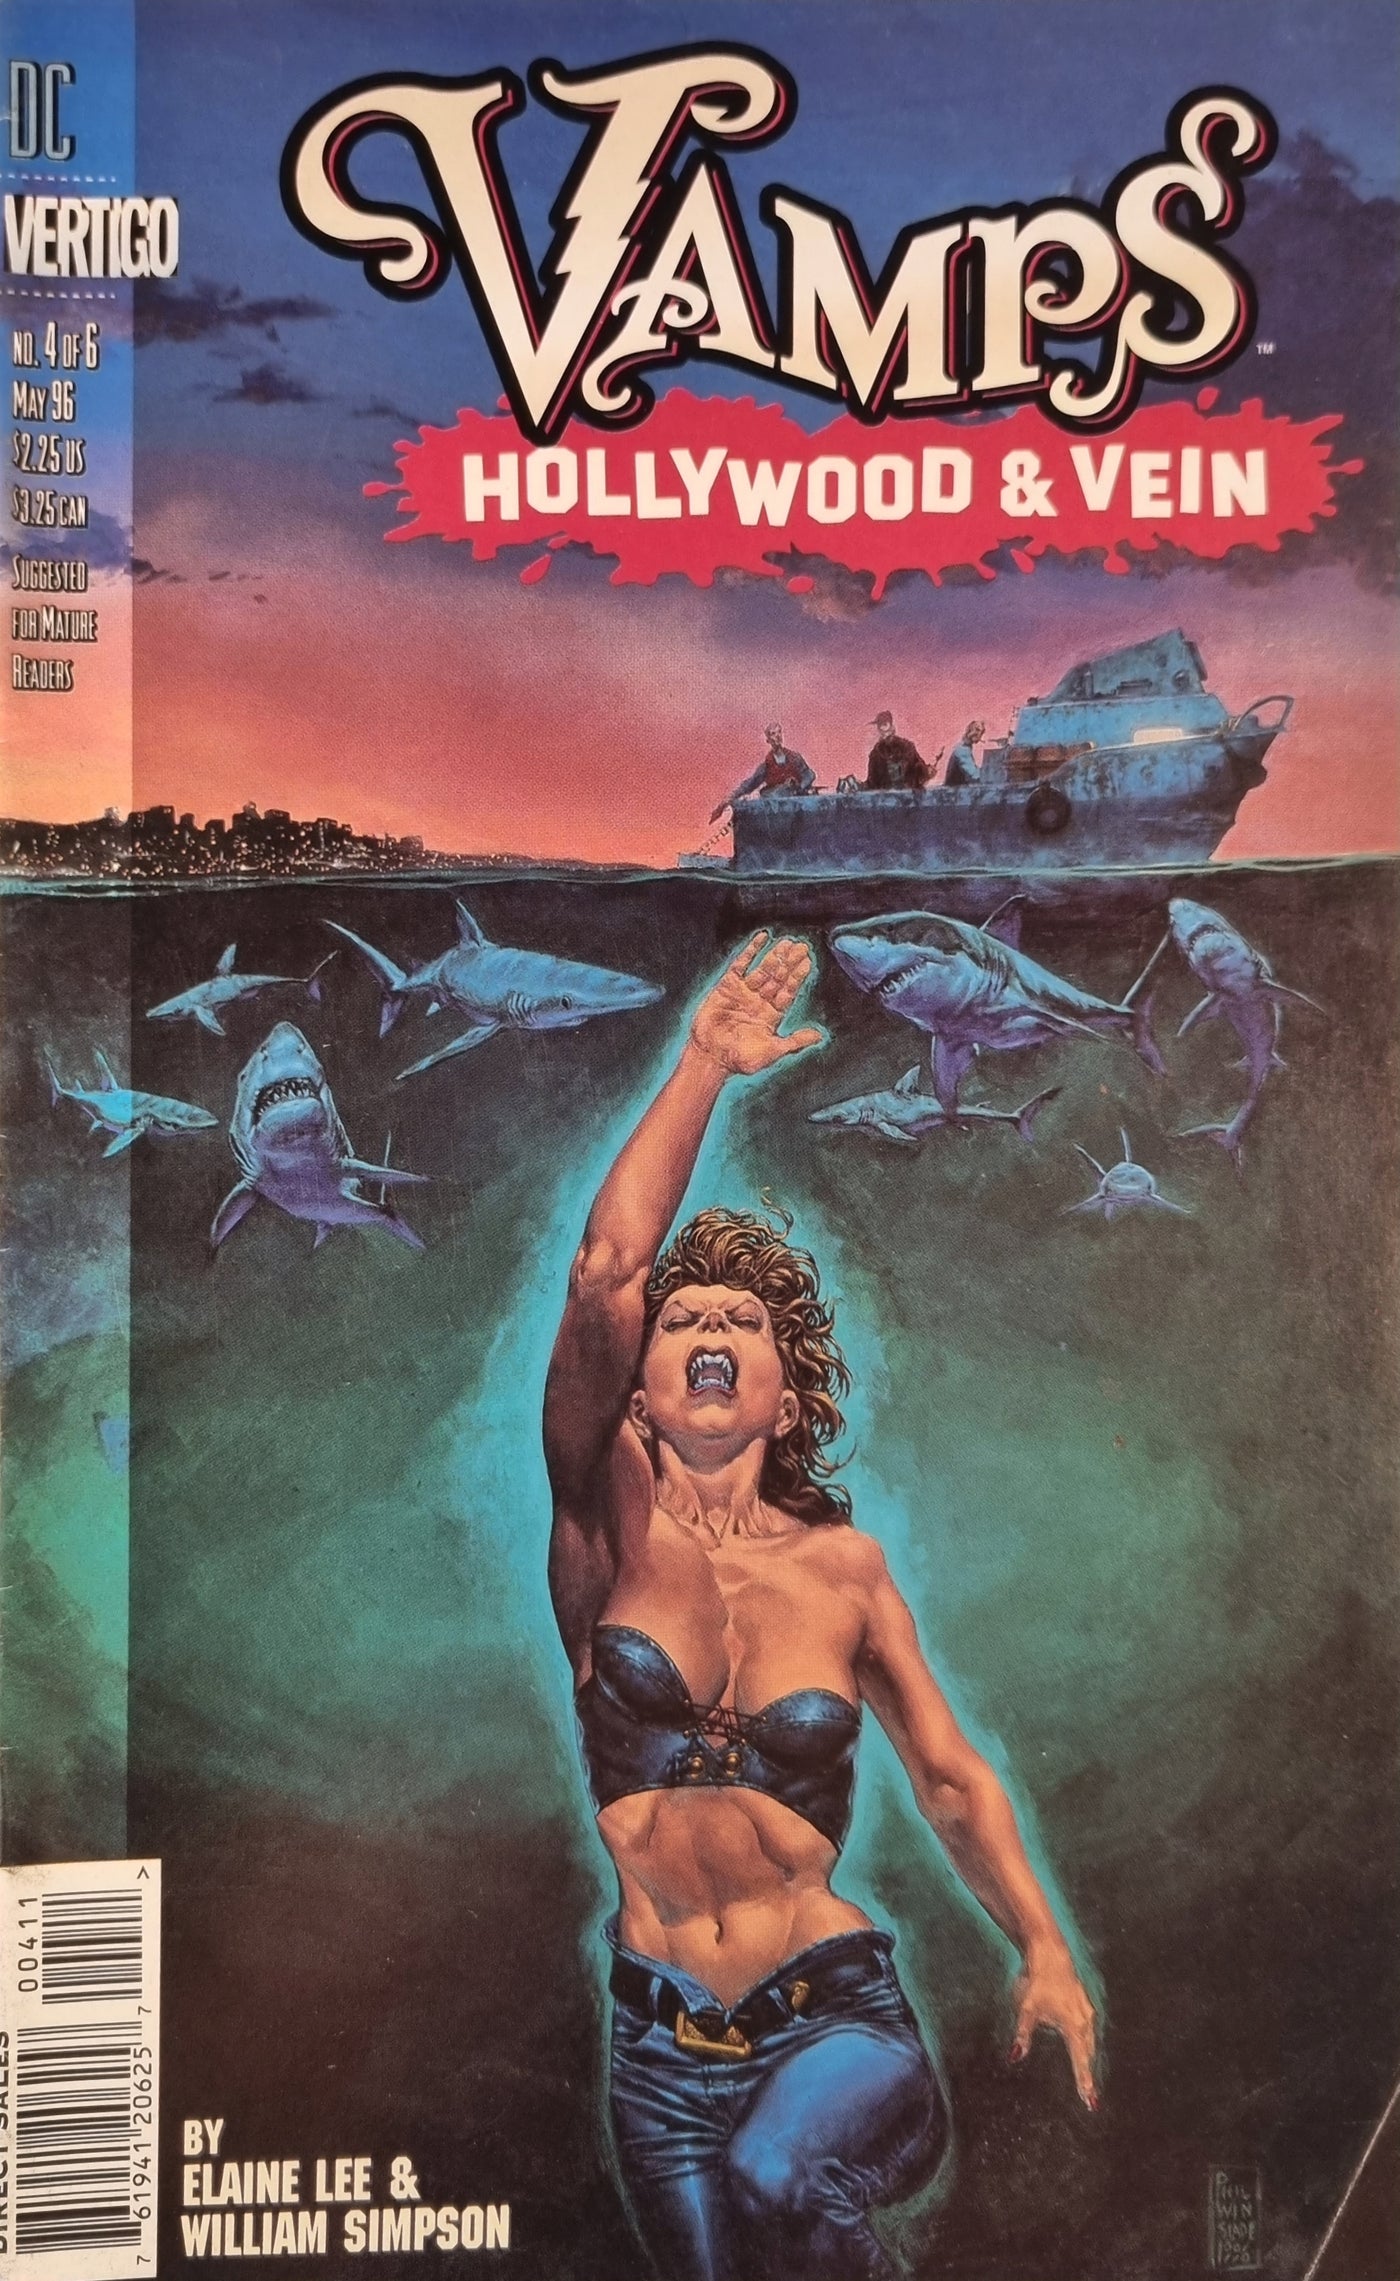 Vamps: Hollywood & Vein #4 (of 6)